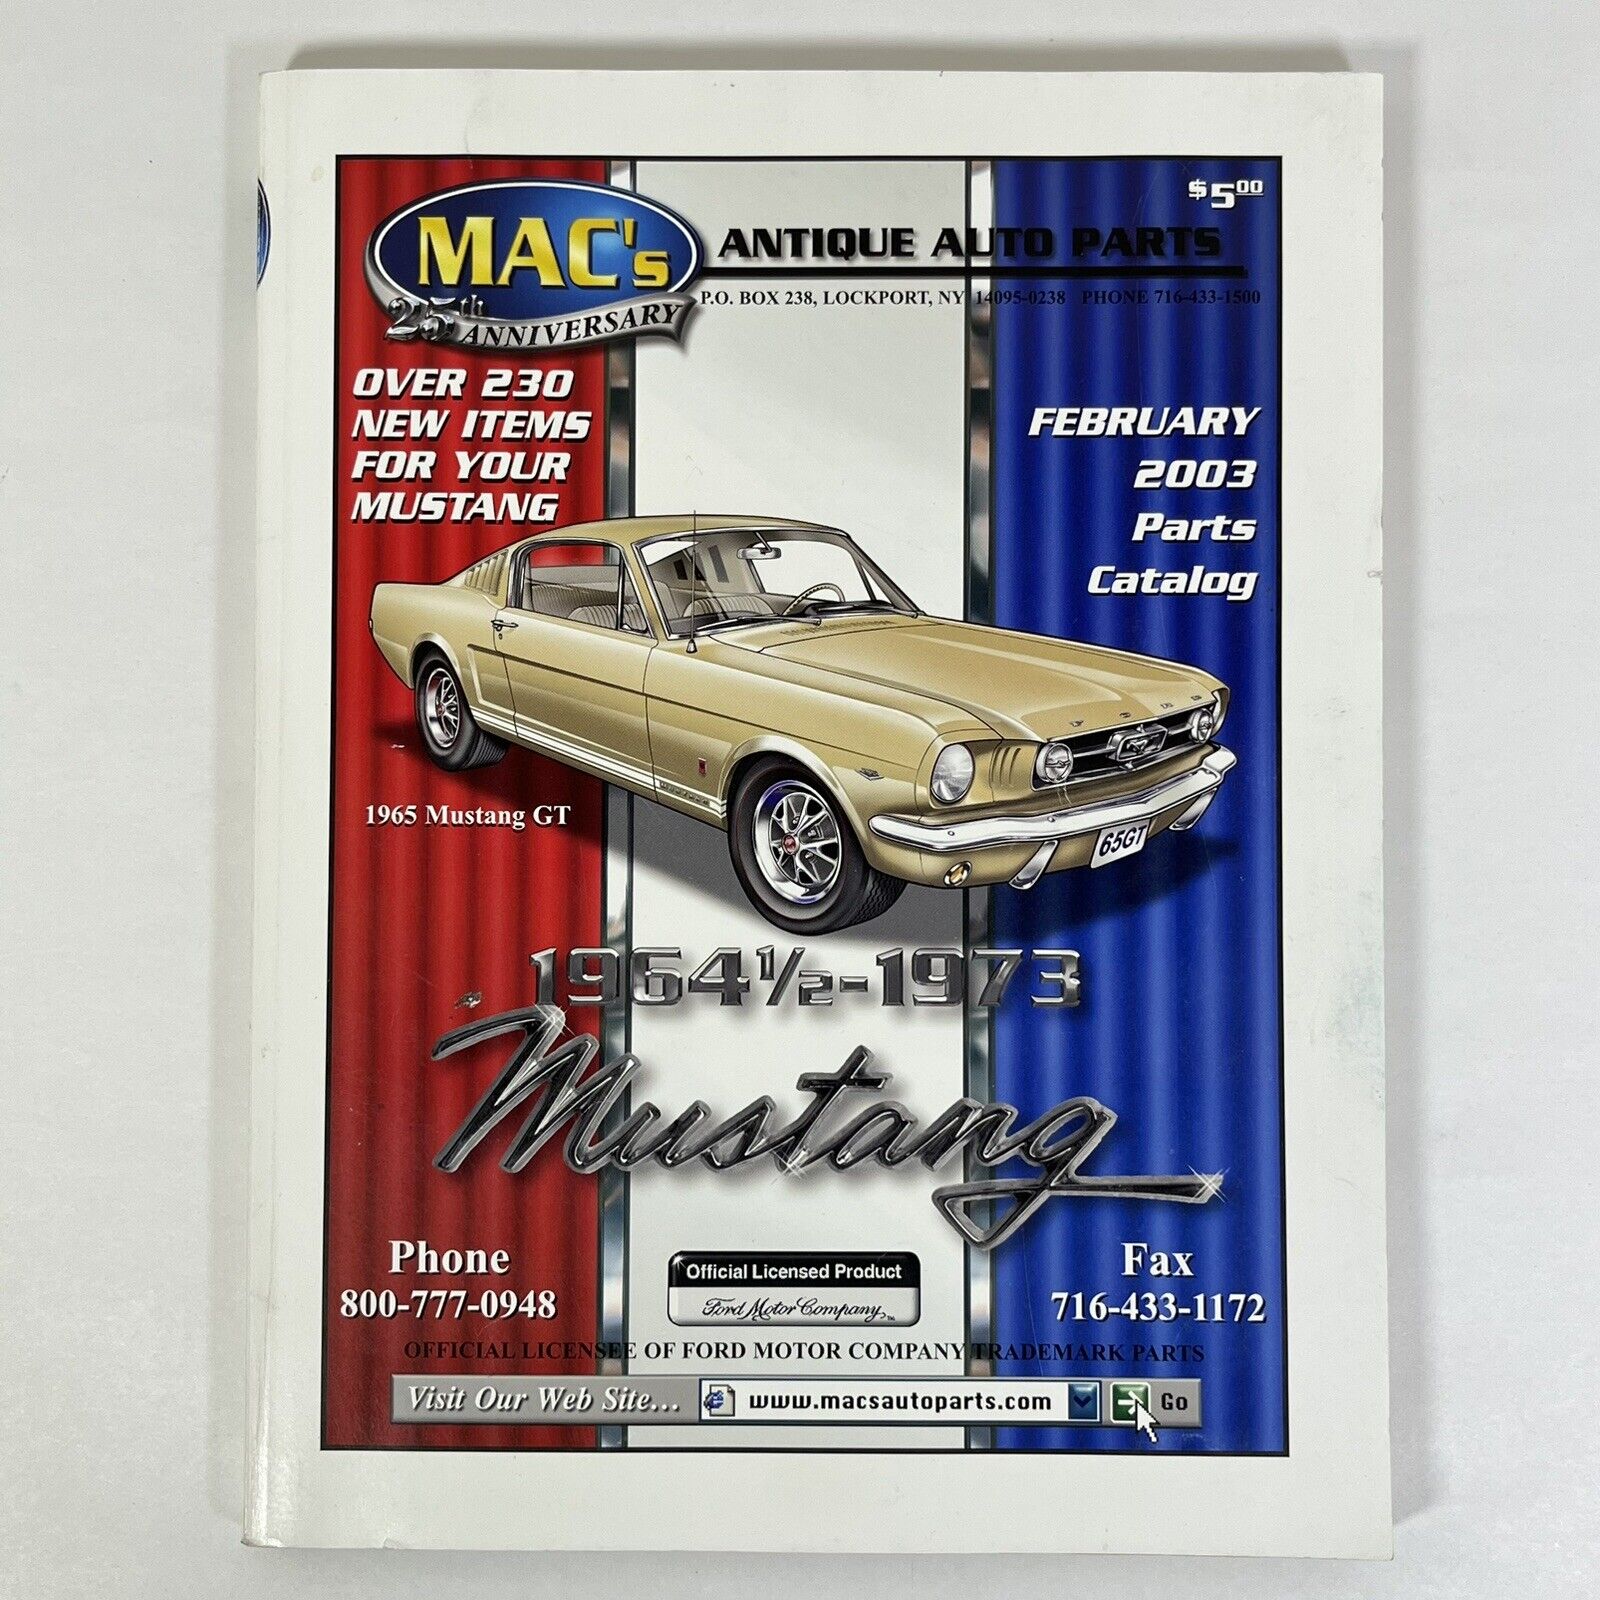 2003 MAC's Antique Auto Parts Catalog for 1964½ - 1973 Ford MUSTANG